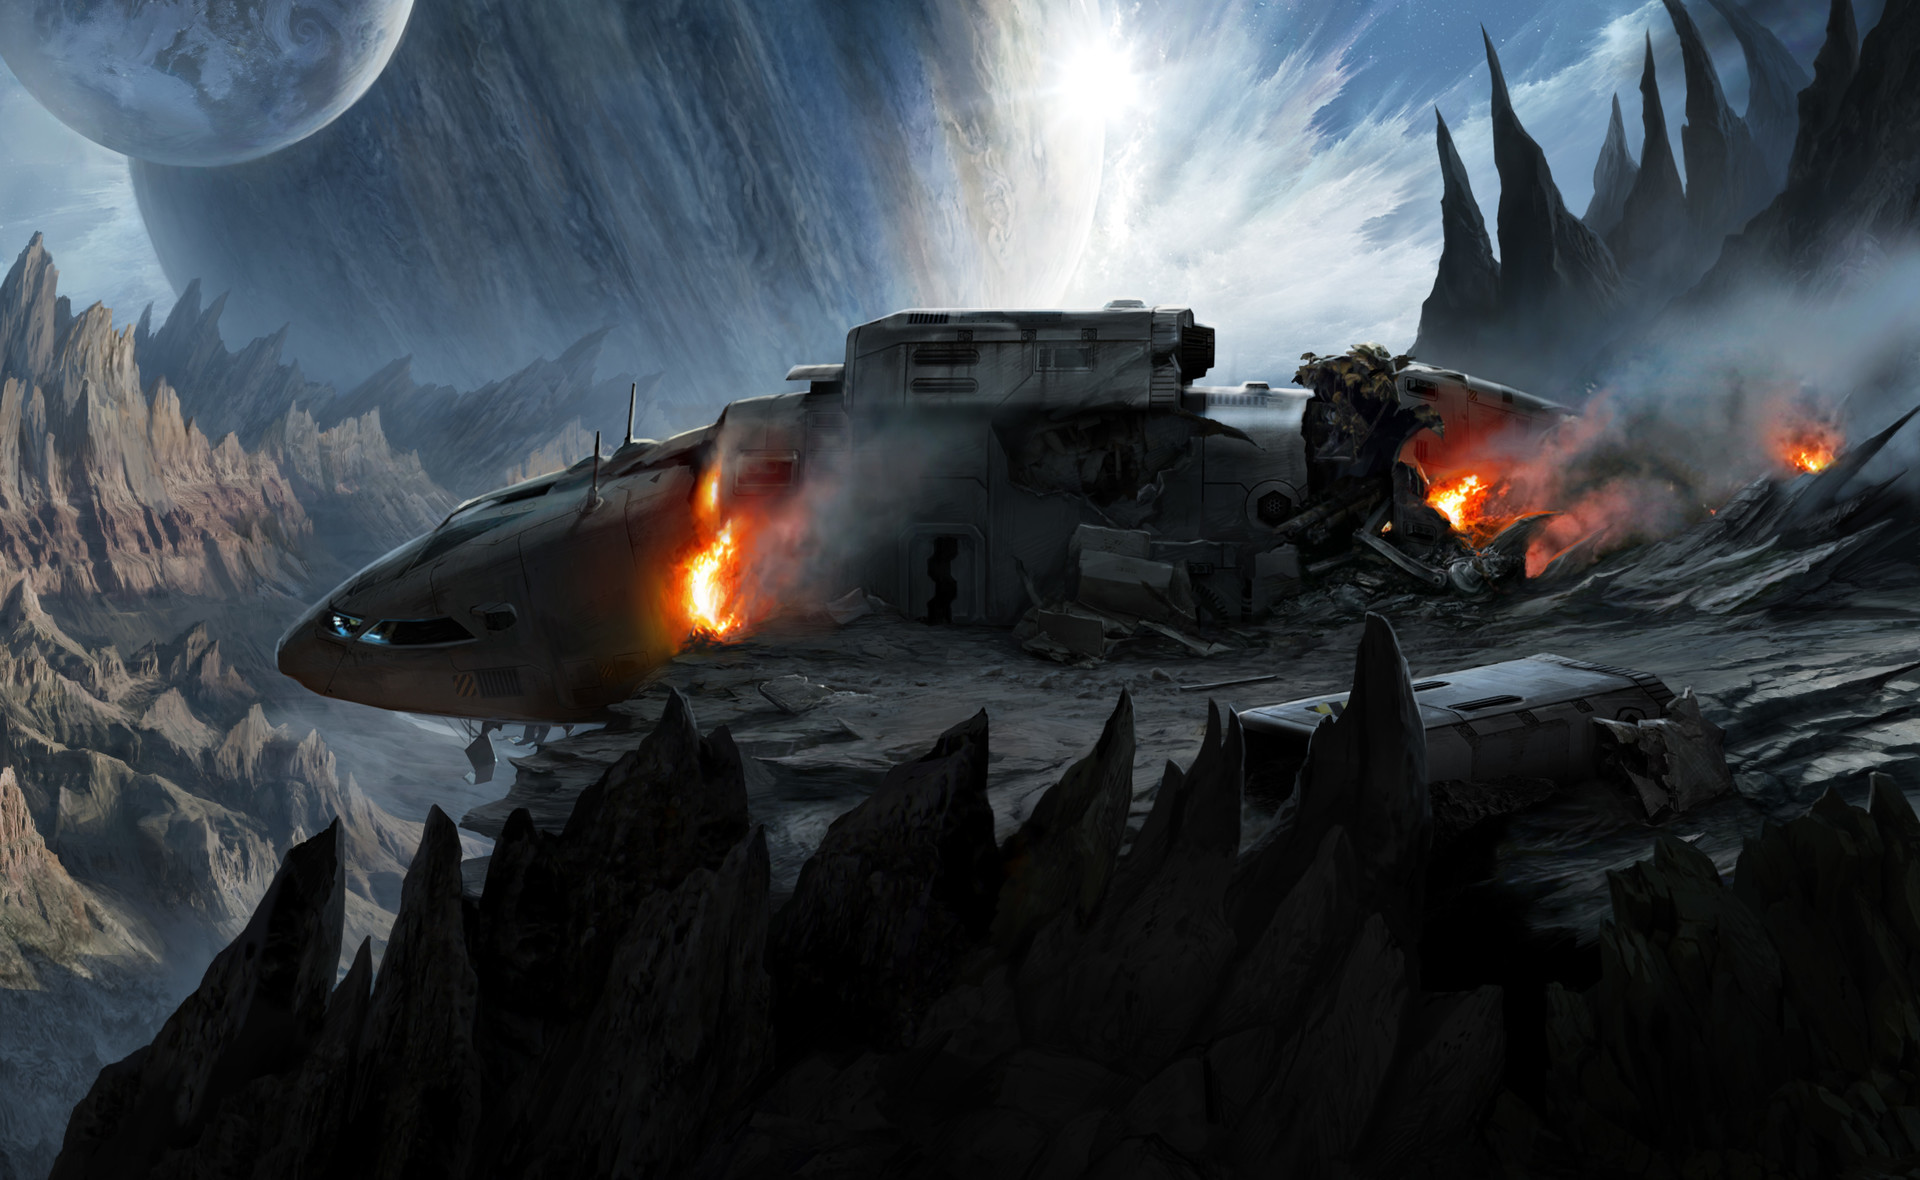 1920x1180 Spaceship wreck background for M.O.N.O.L.I.T.H. game